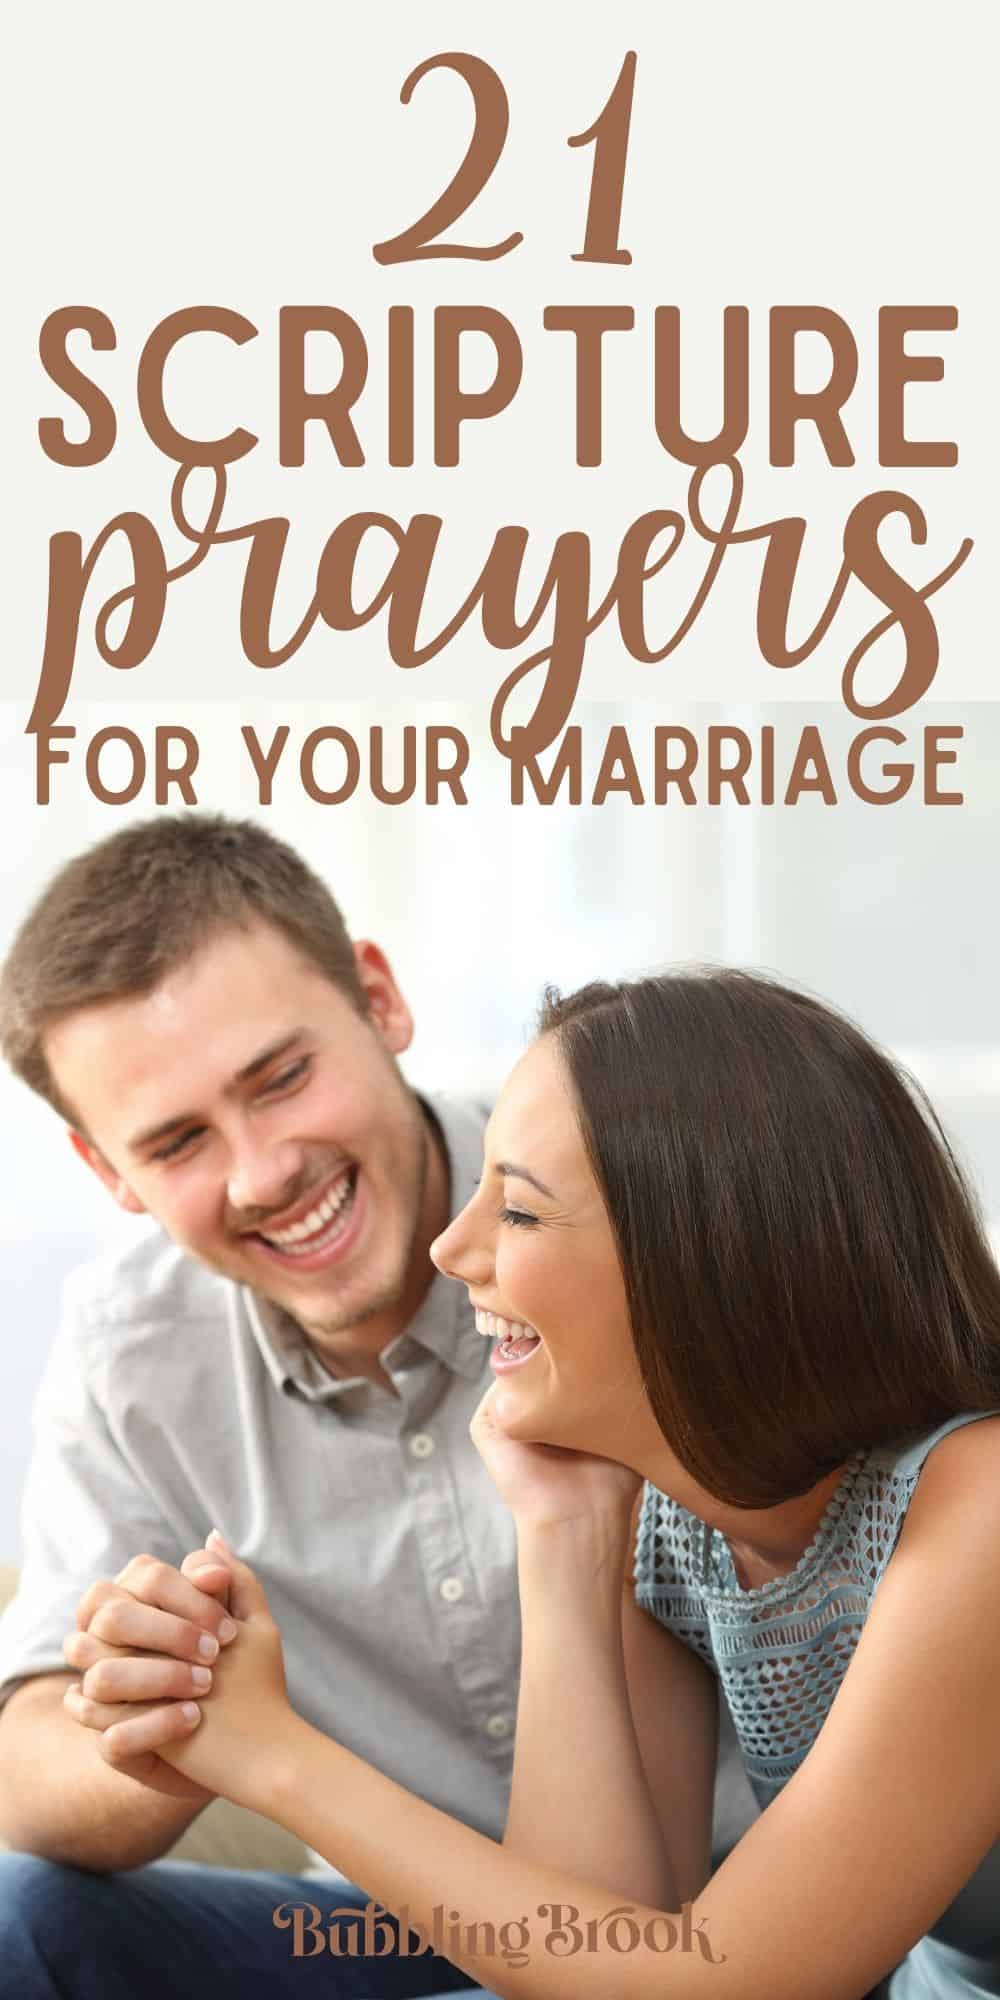 21 Scripture Prayers for Marriage - pin for Pinterest